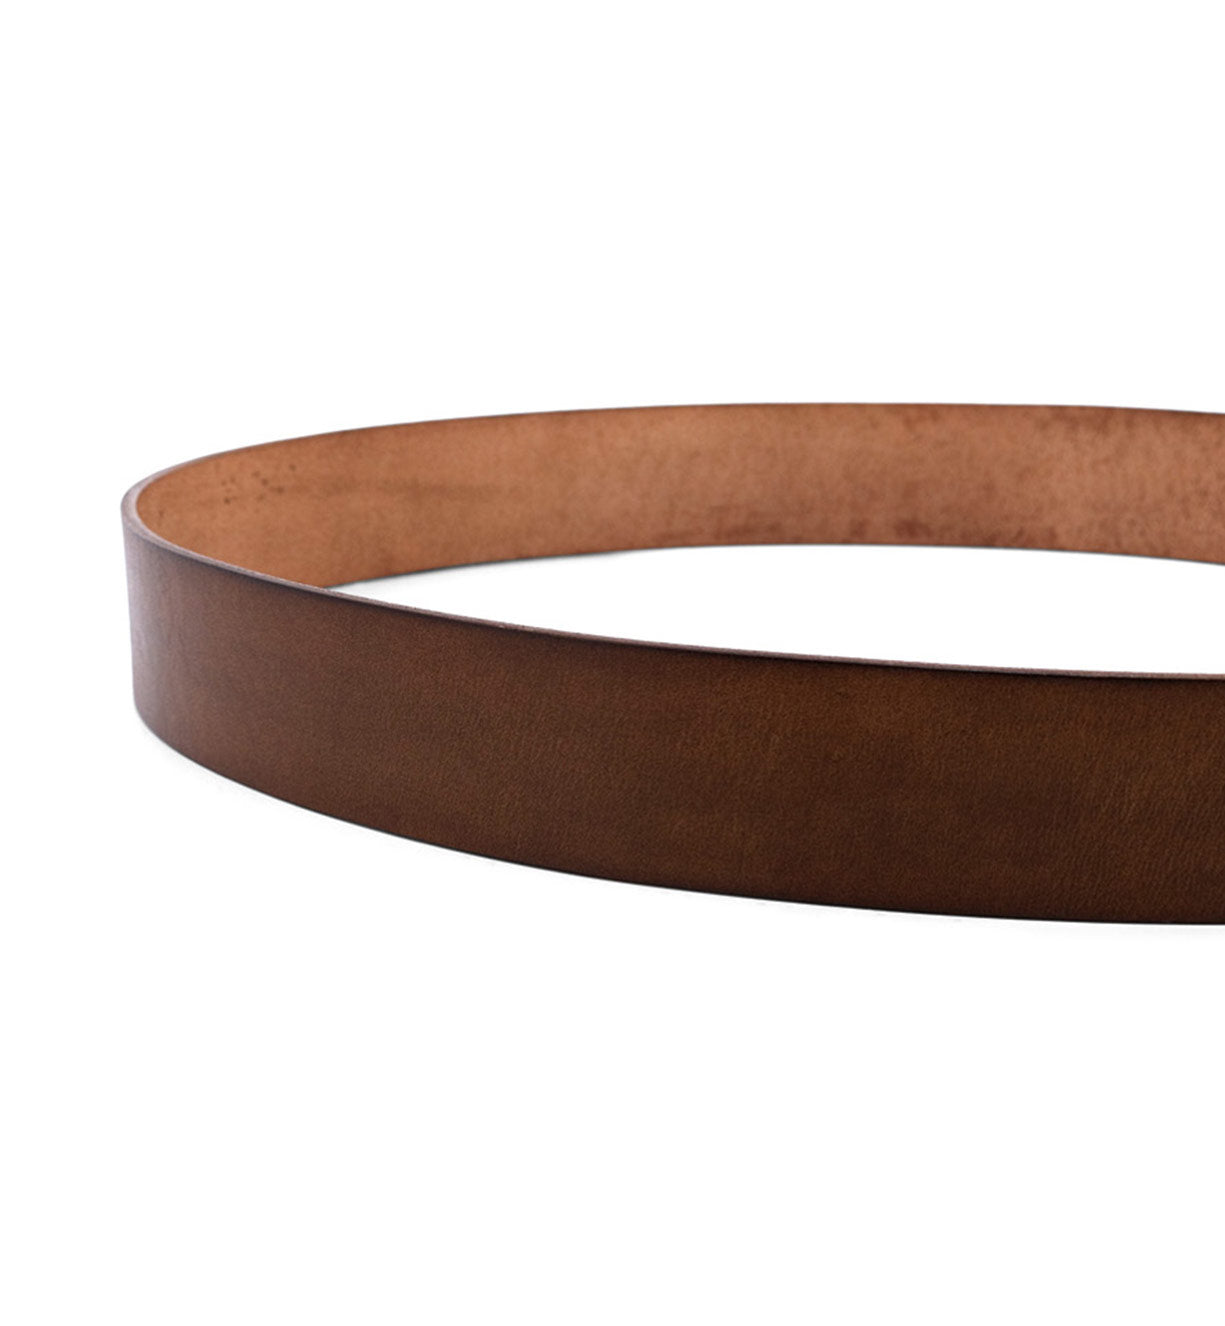 A Hobo brown leather belt on a white background, by Bed Stu.